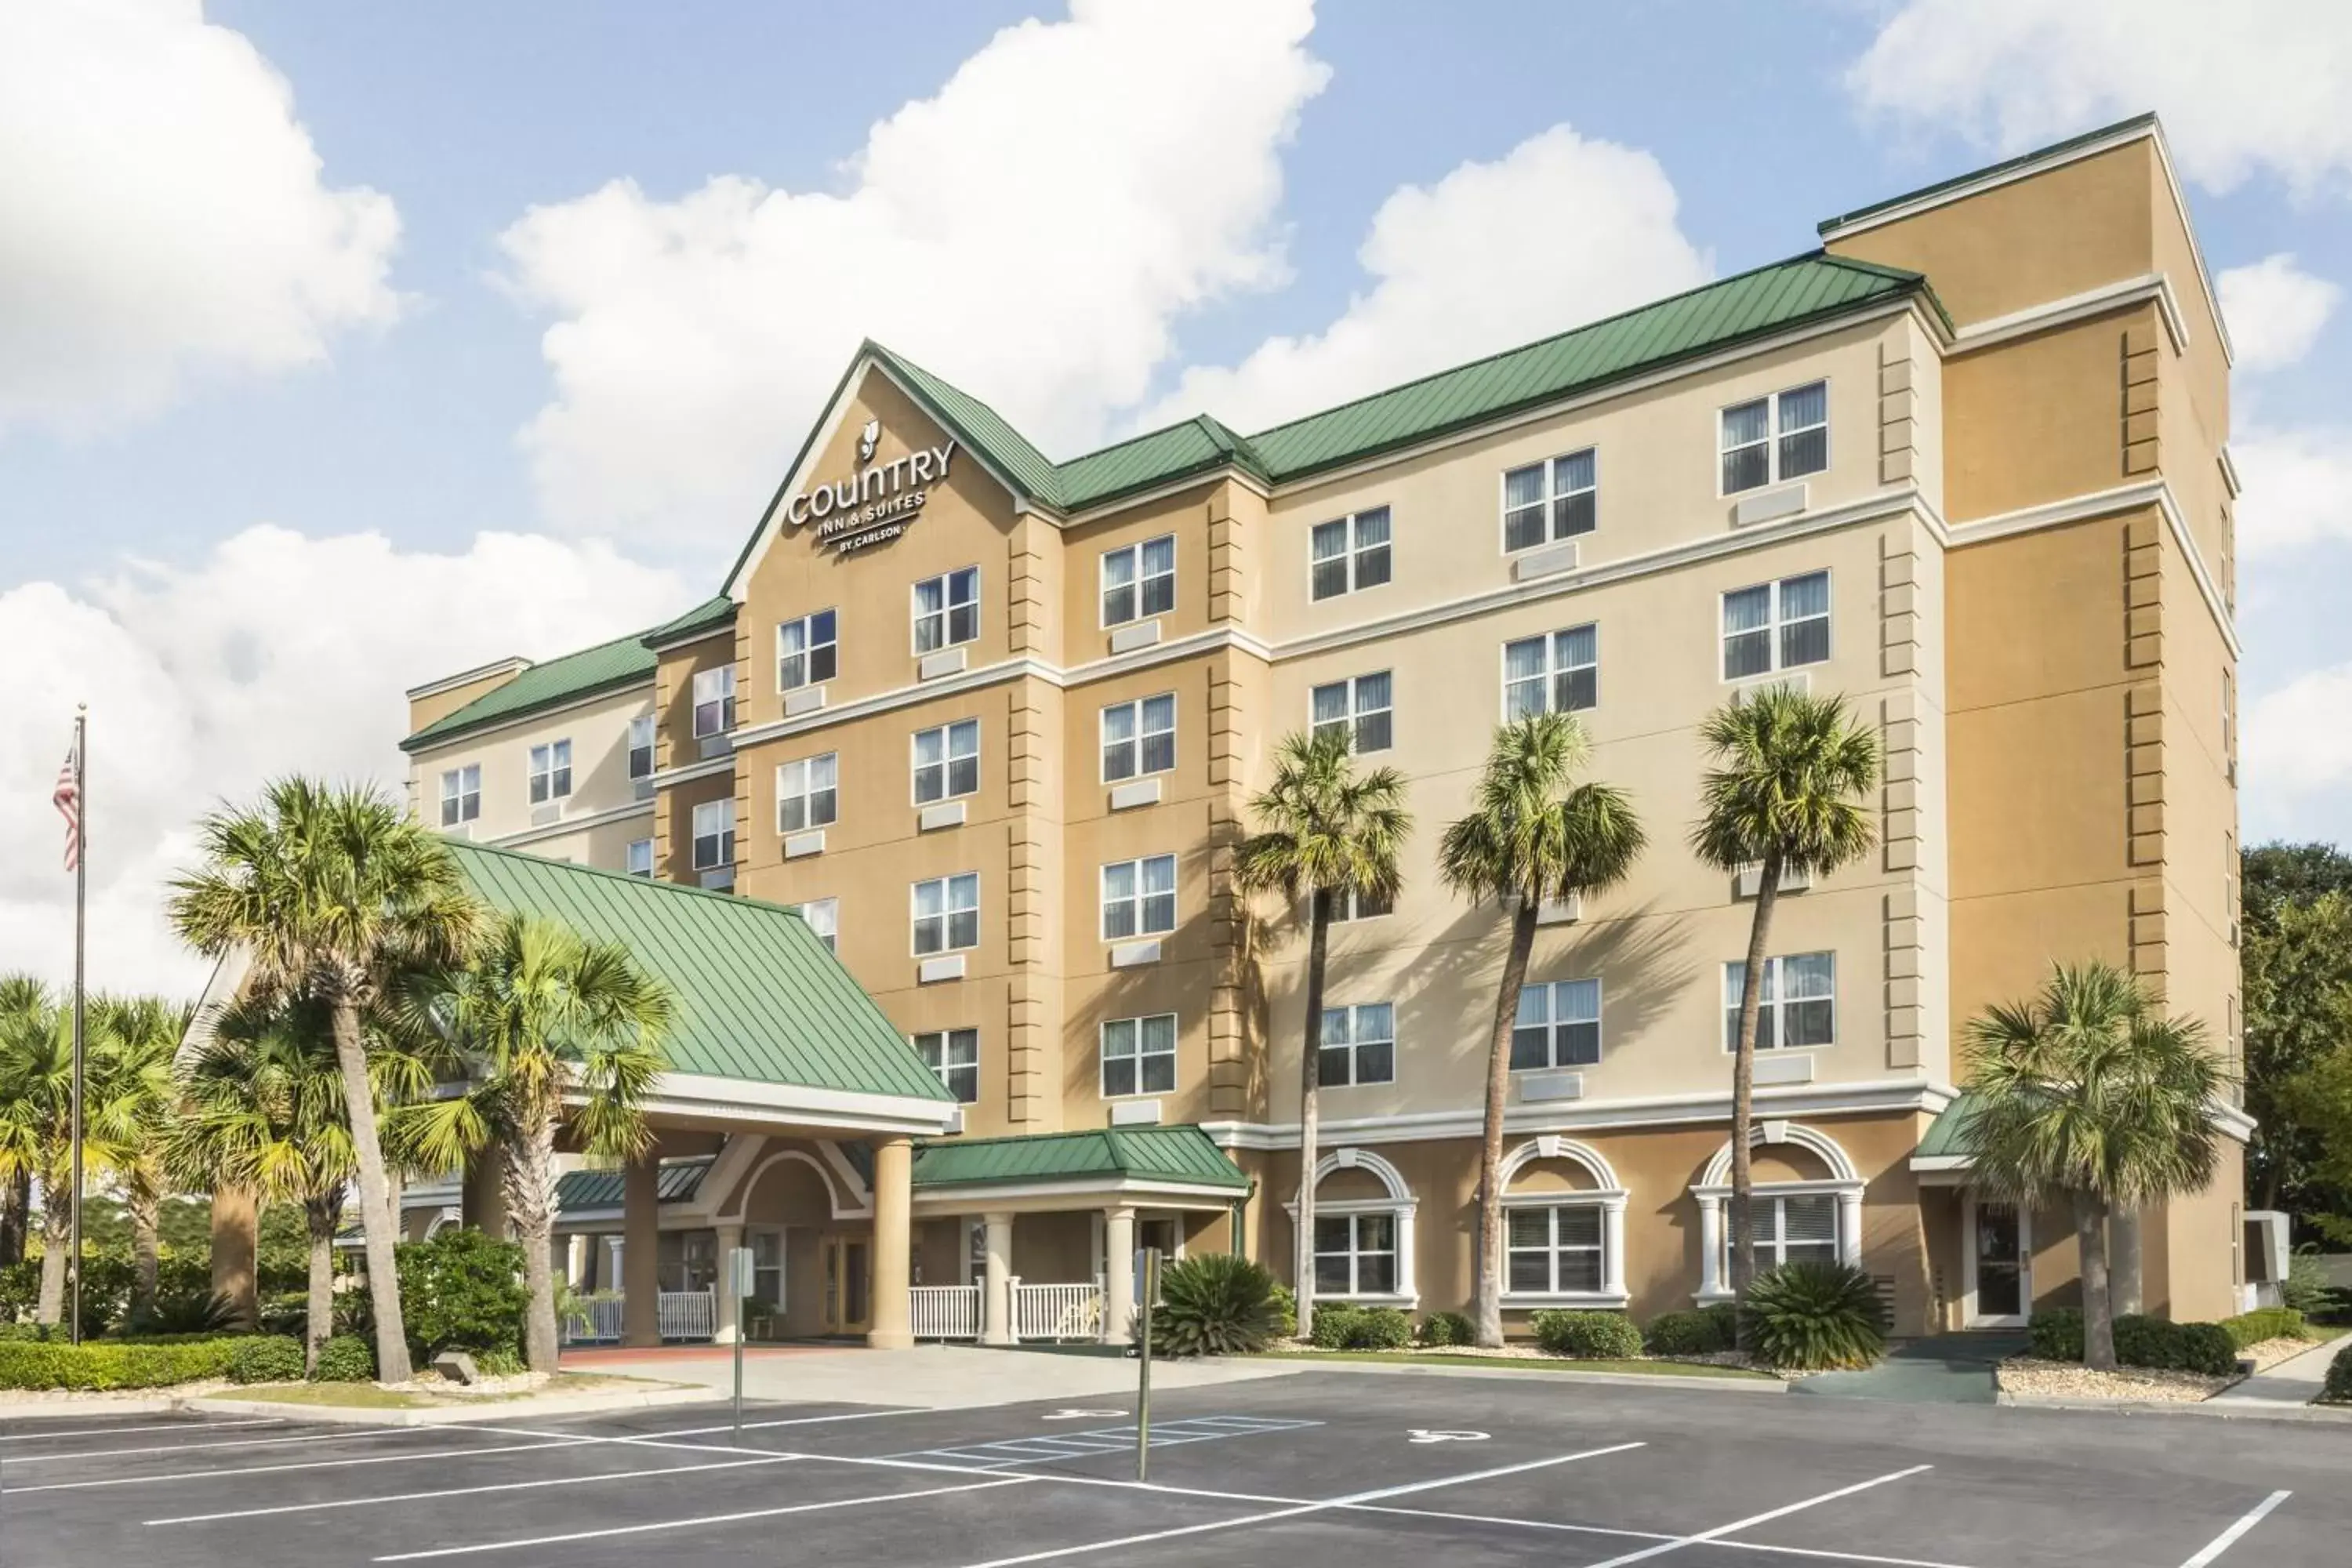 Facade/entrance, Property Building in Country Inn & Suites by Radisson, Valdosta, GA - NEWLY RENOVATED